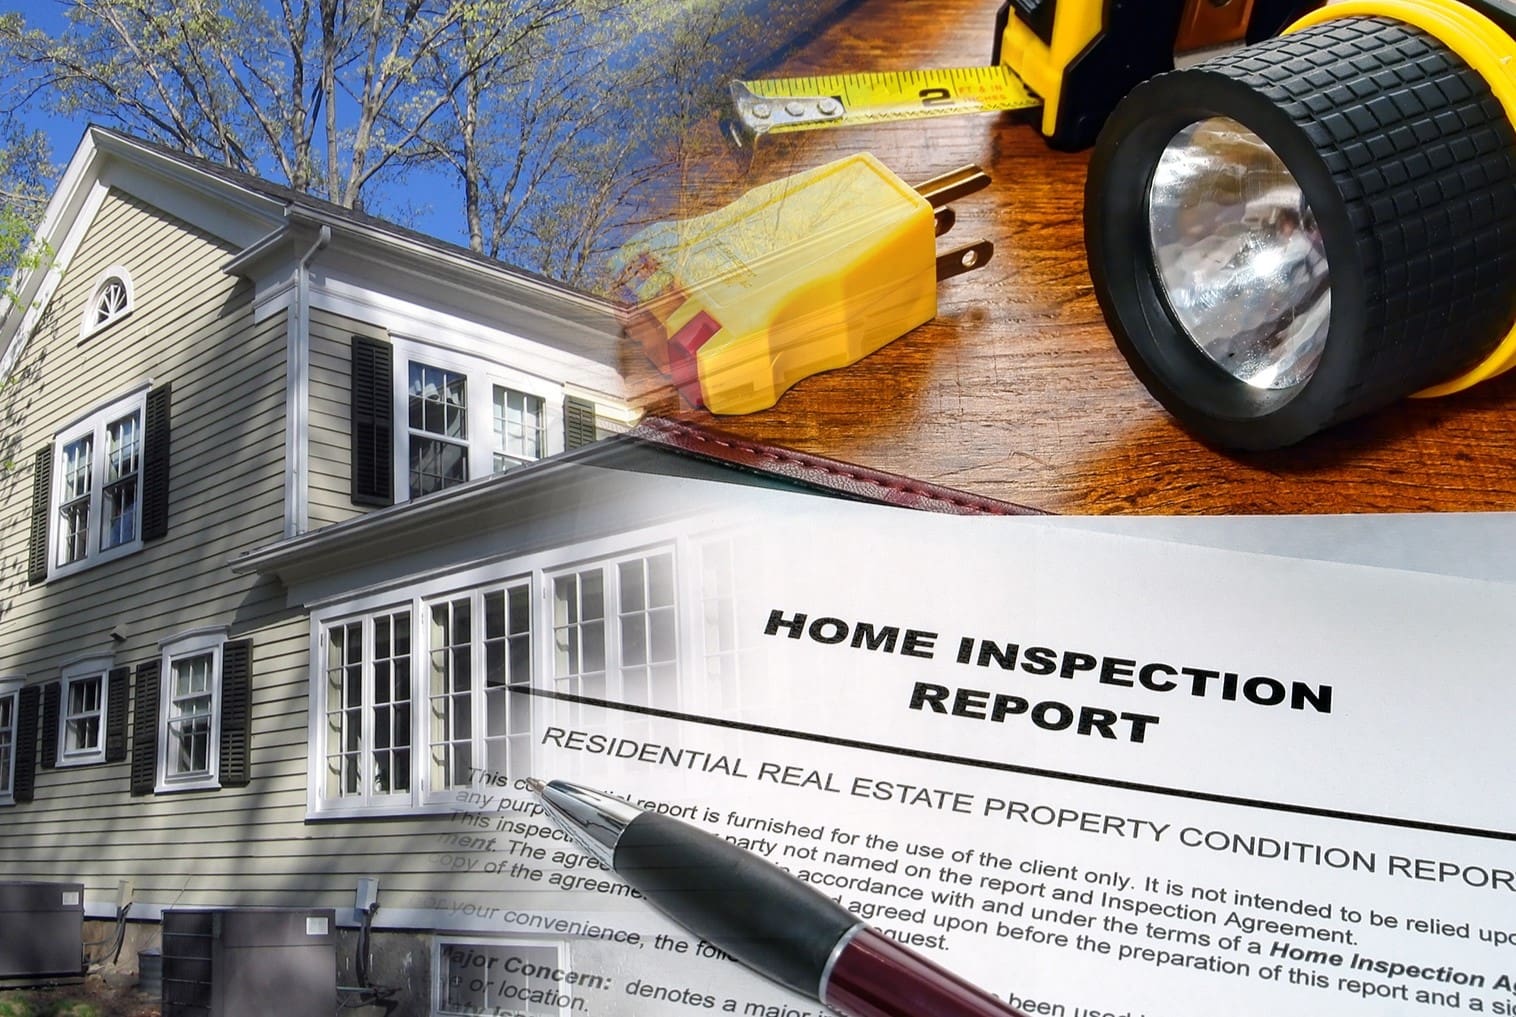 How To Find A Home Inspection Report